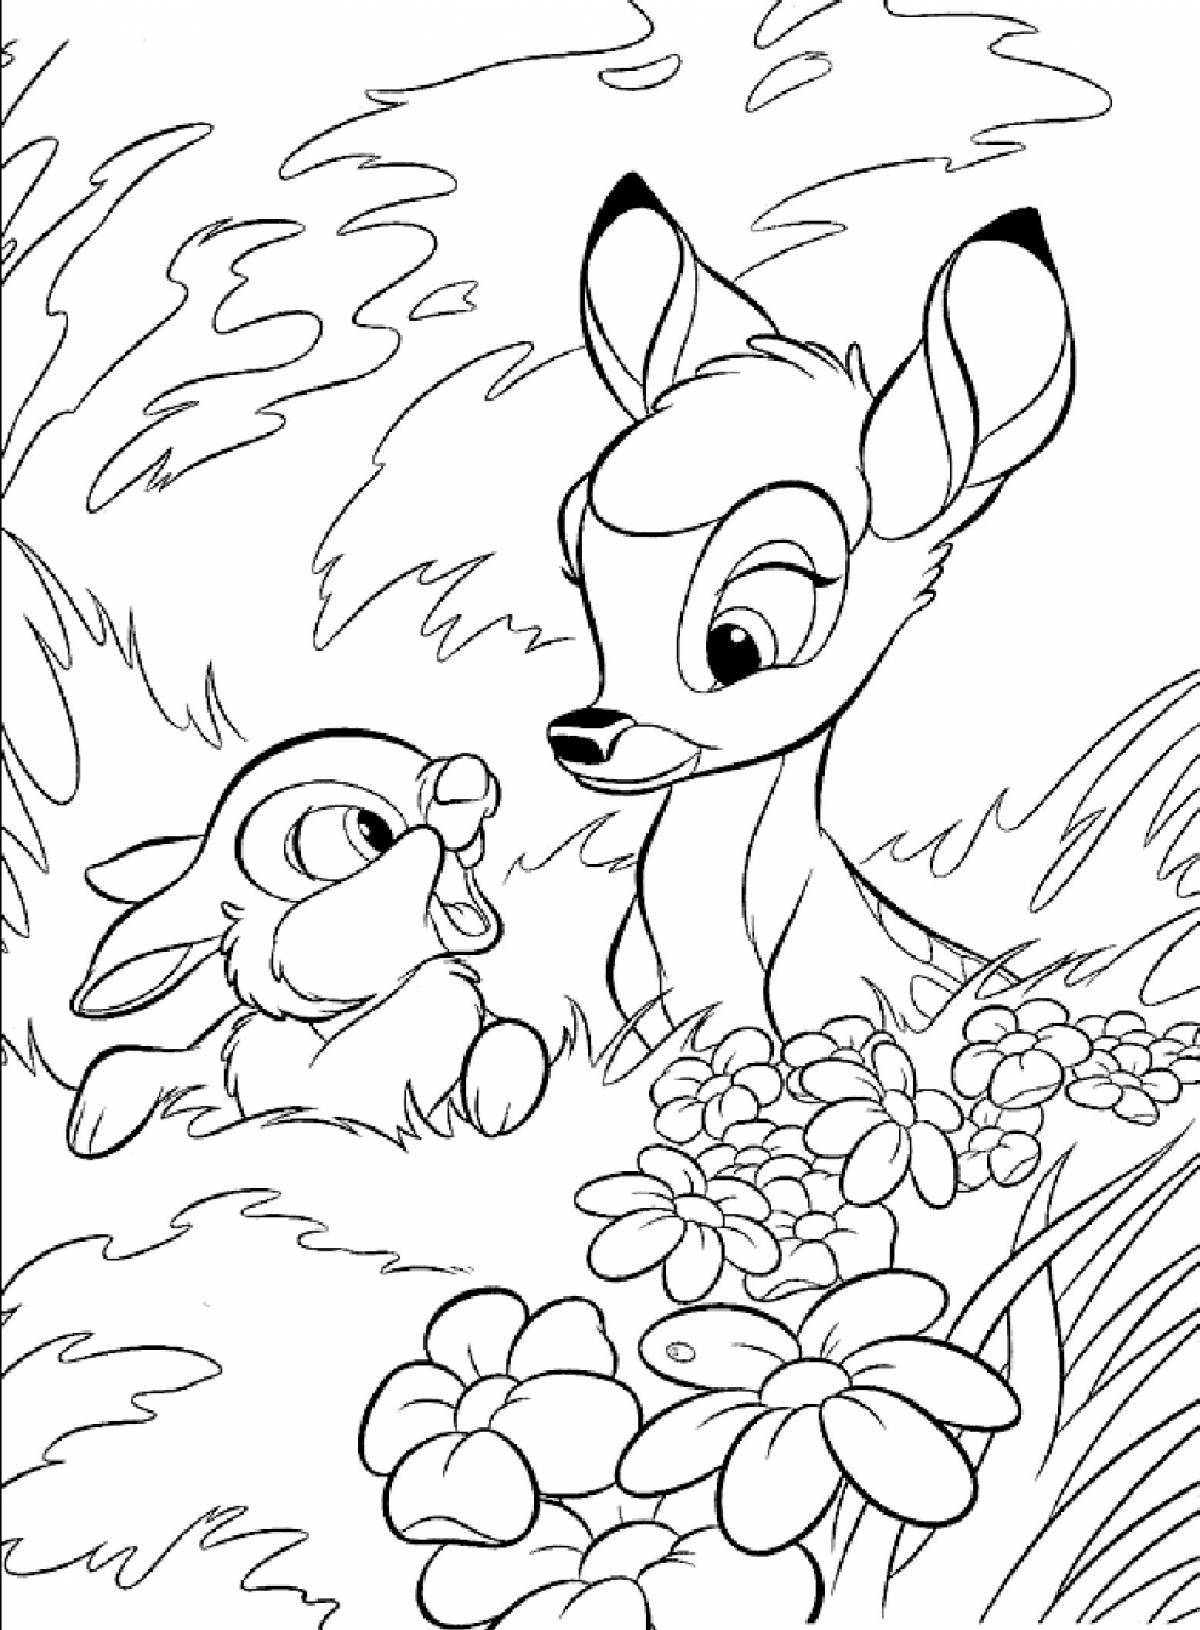 Great coloring book for girls 5 years old animals